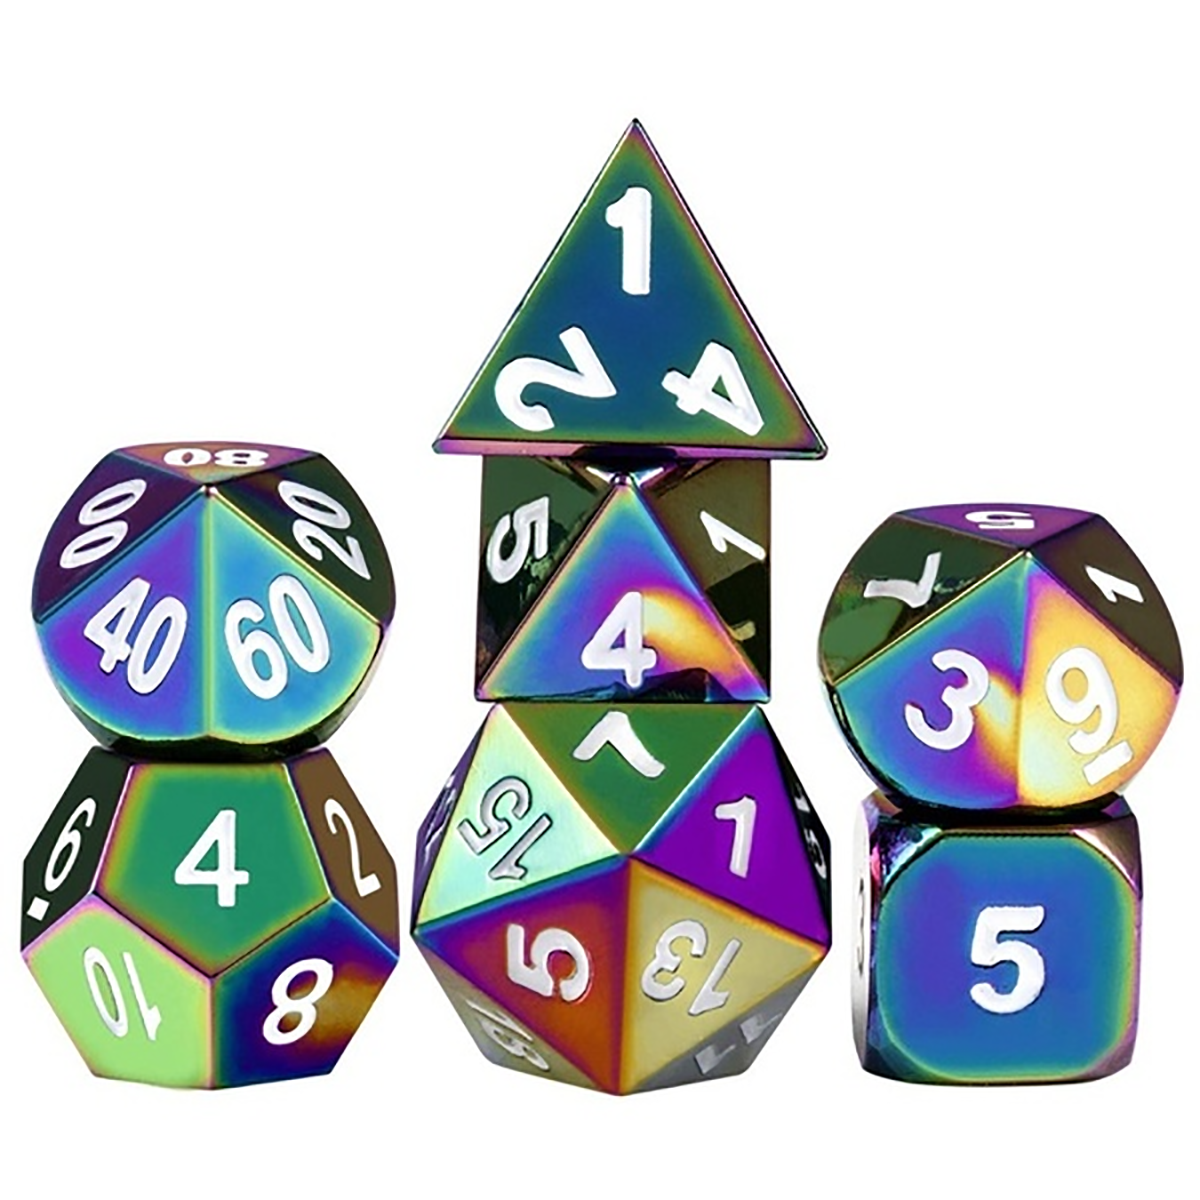 7-PcsSet-Metal-Dice-Set-Role-Playing-Dragons-Table-Game-With-Cloth-Bag-Bar-Party-Game-Dice-1677684-6